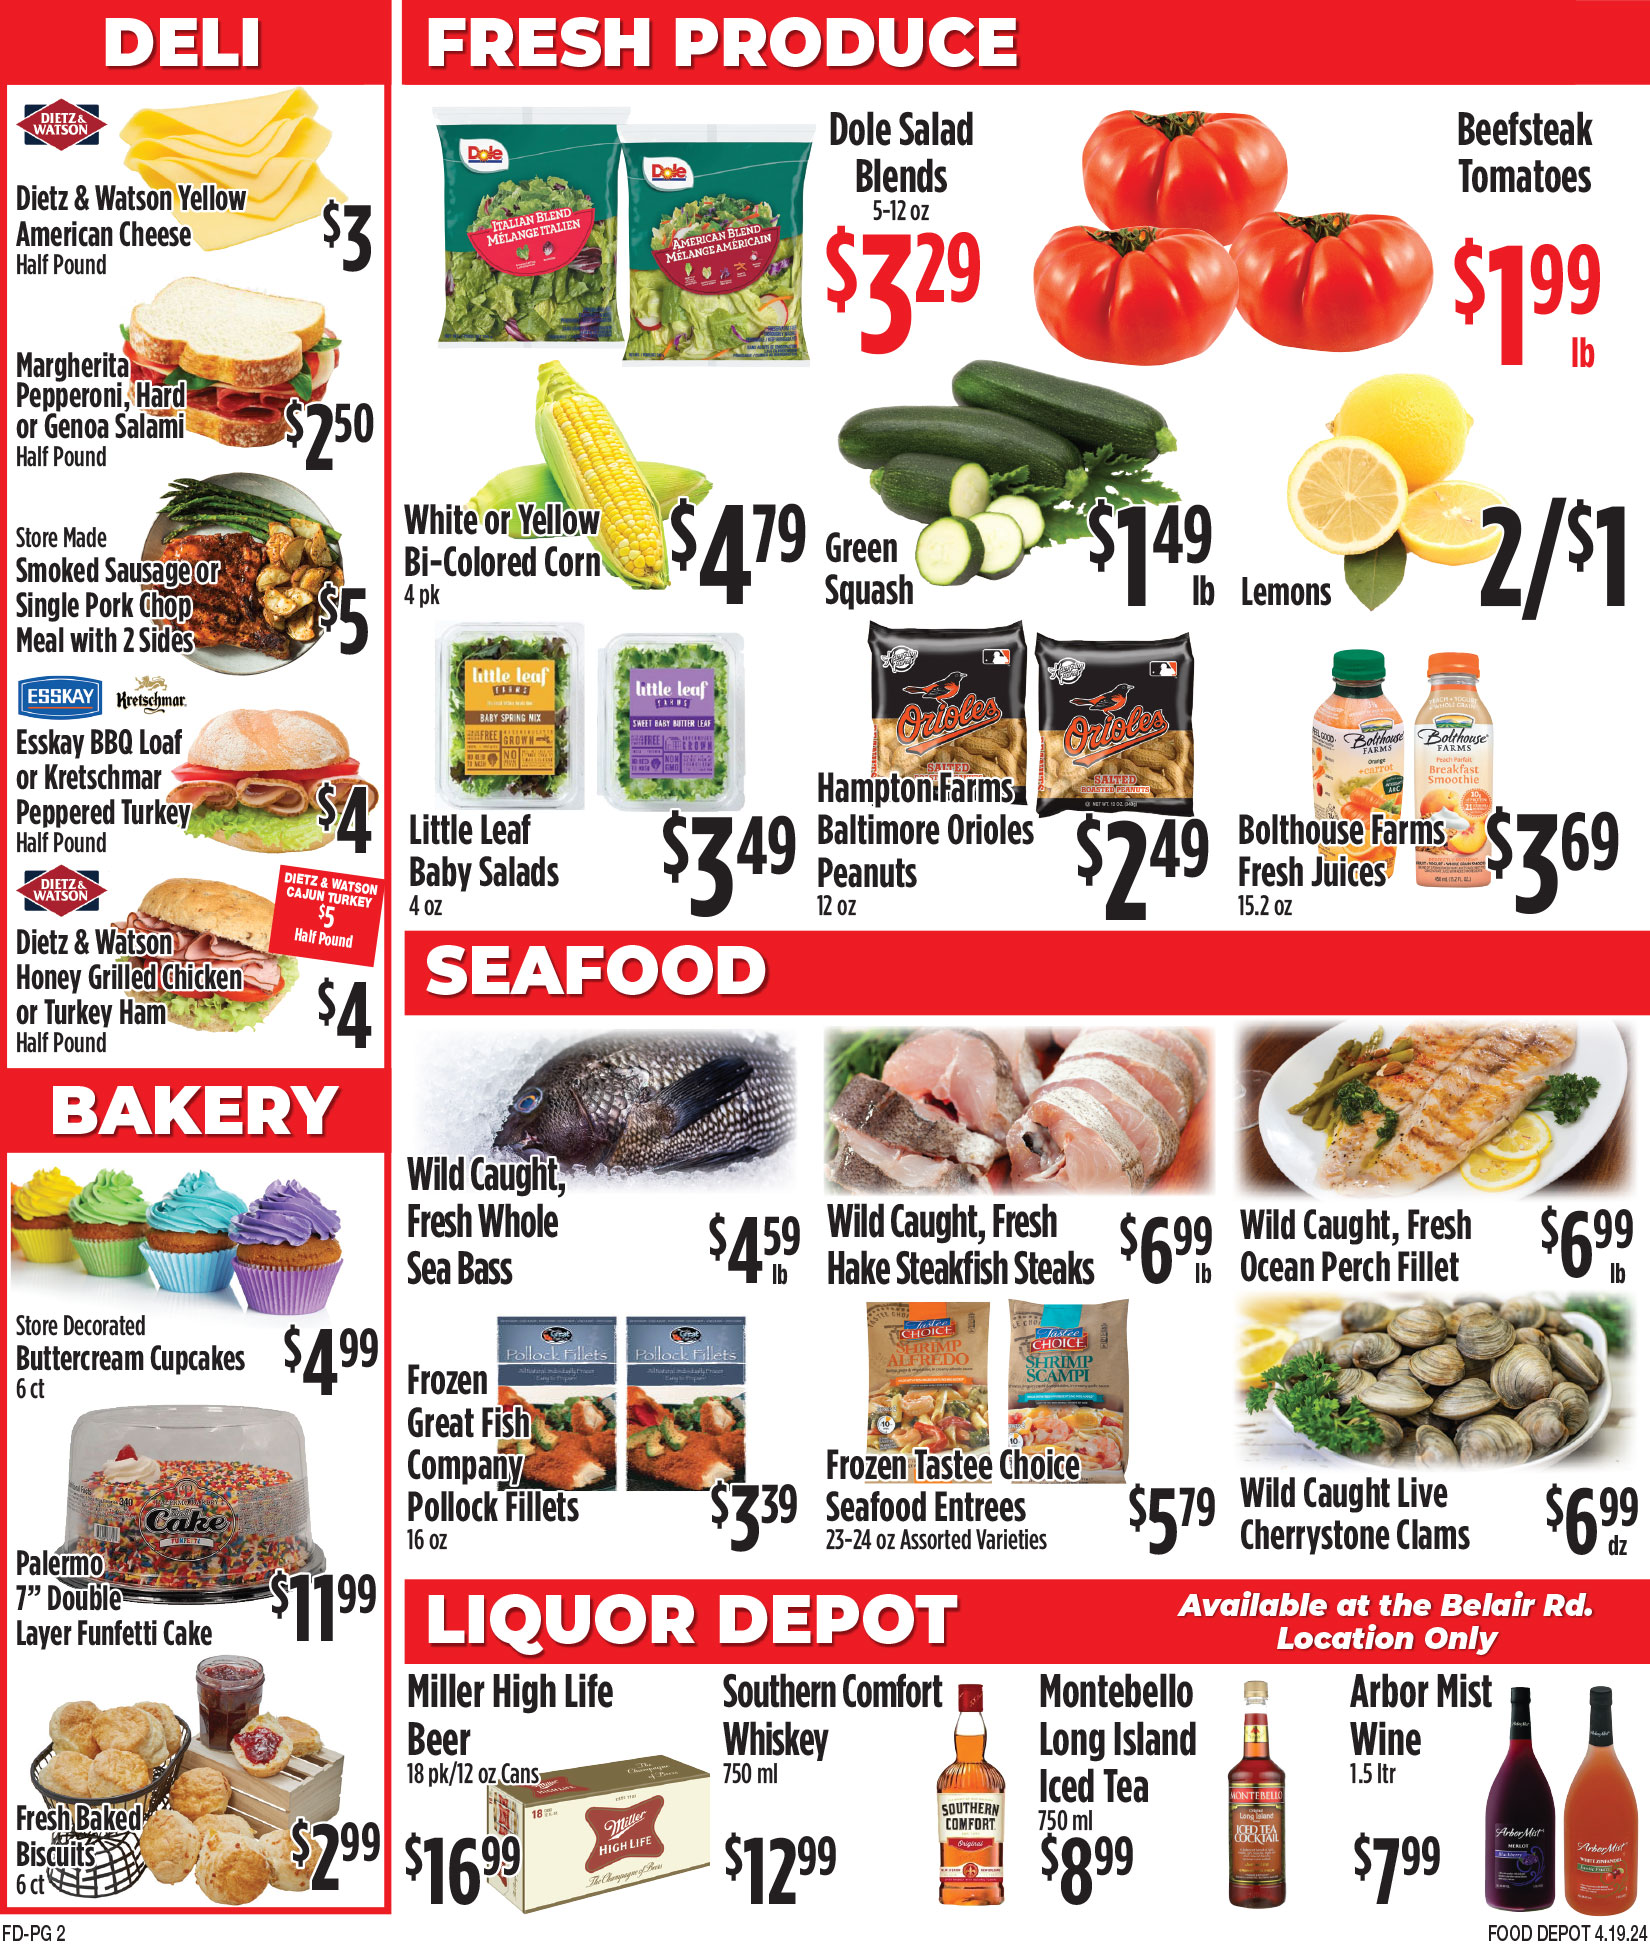 This Week's Specials - page 2